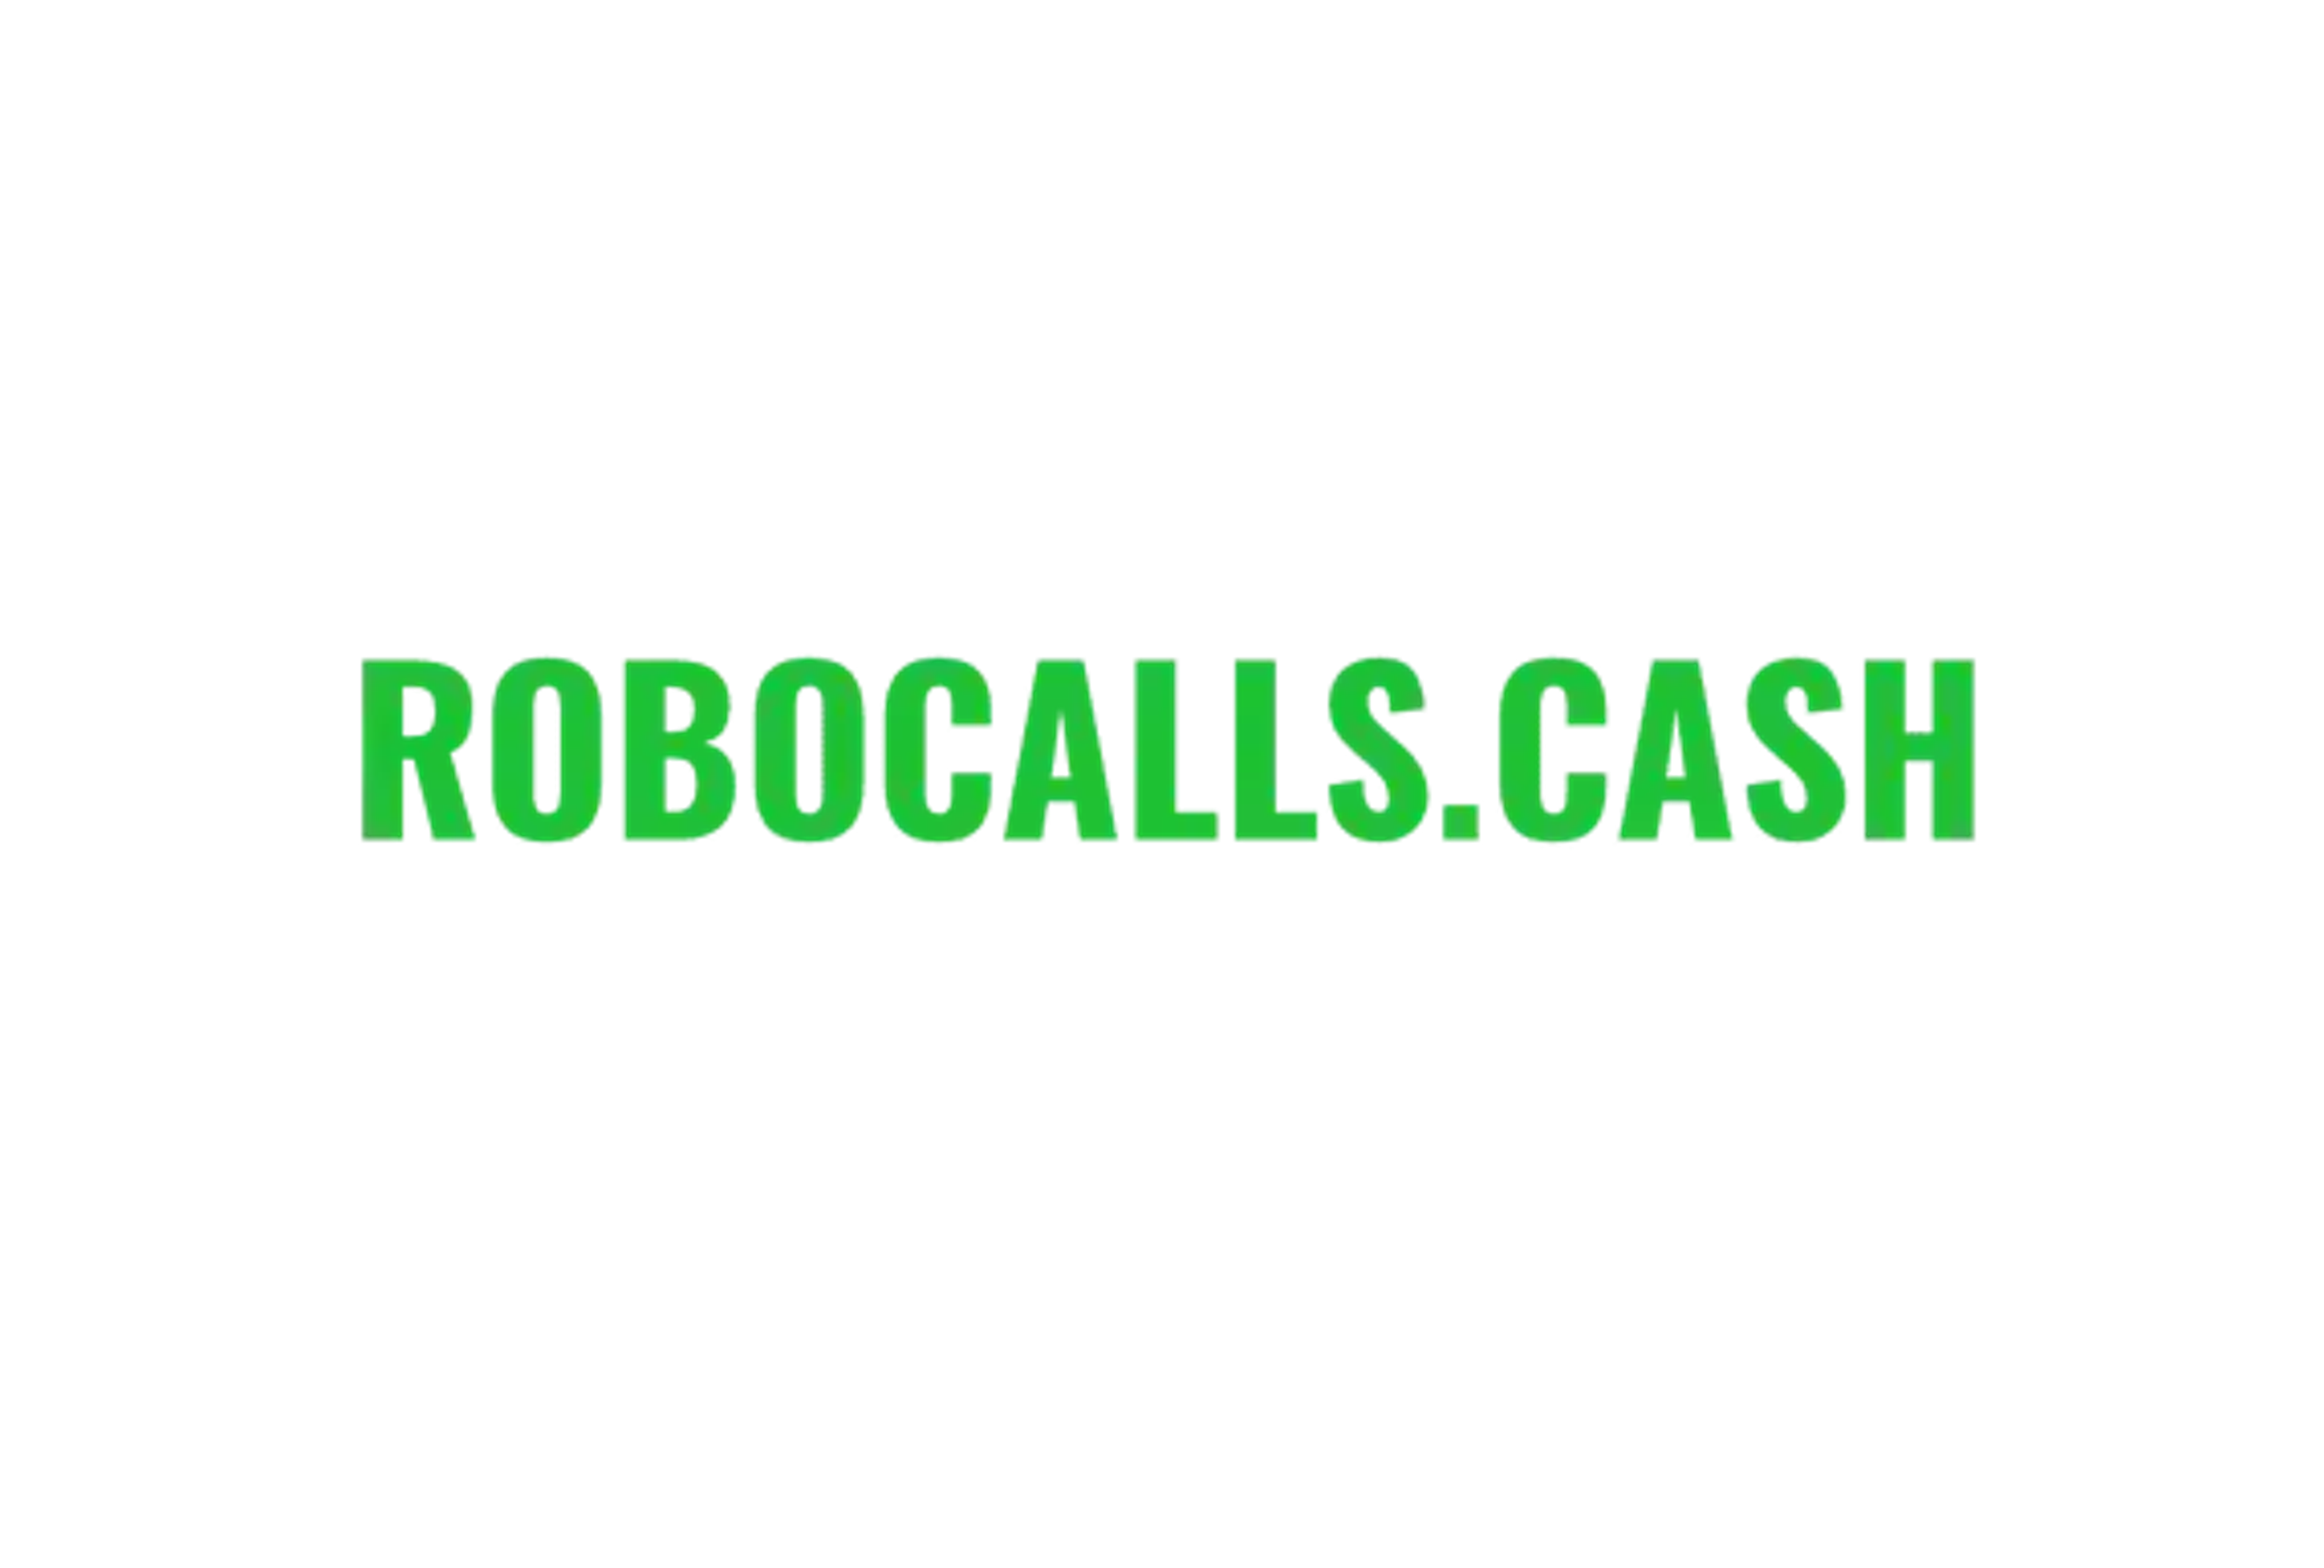 "TURNING ROBOCALLS INTO CASH" IN THE NEWS...